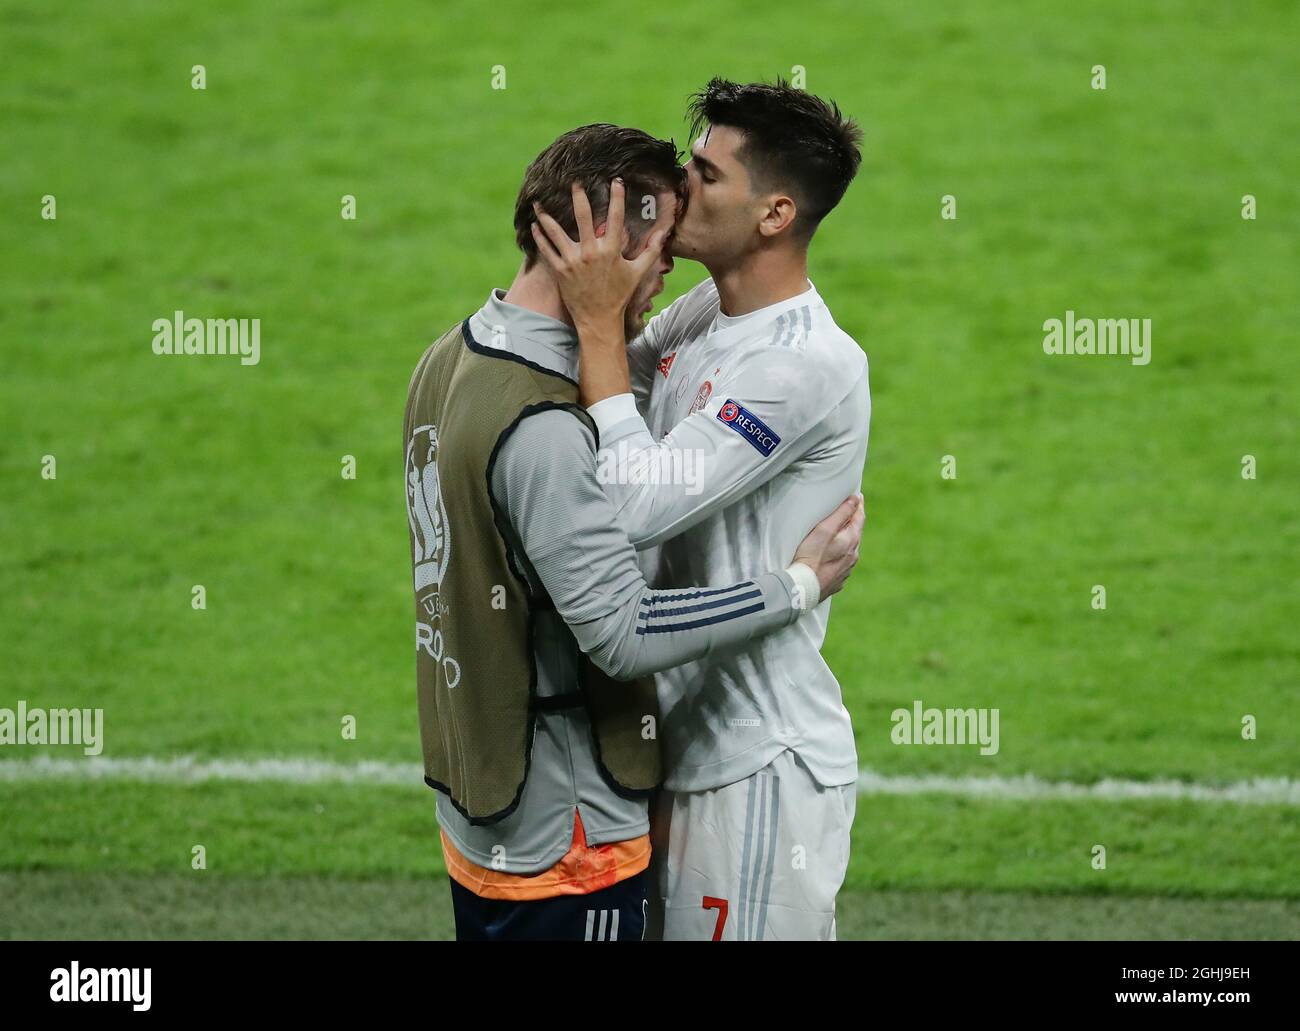 London, England, 6th July 2021.  Goalscorer Alvaro Morata of Spain kisses the head of David De Gea of Spain after scoring the equaliser during the UEFA Euro 2020 match at Wembley Stadium, London. Picture credit should read: David Klein / Sportimage via PA Images Stock Photo